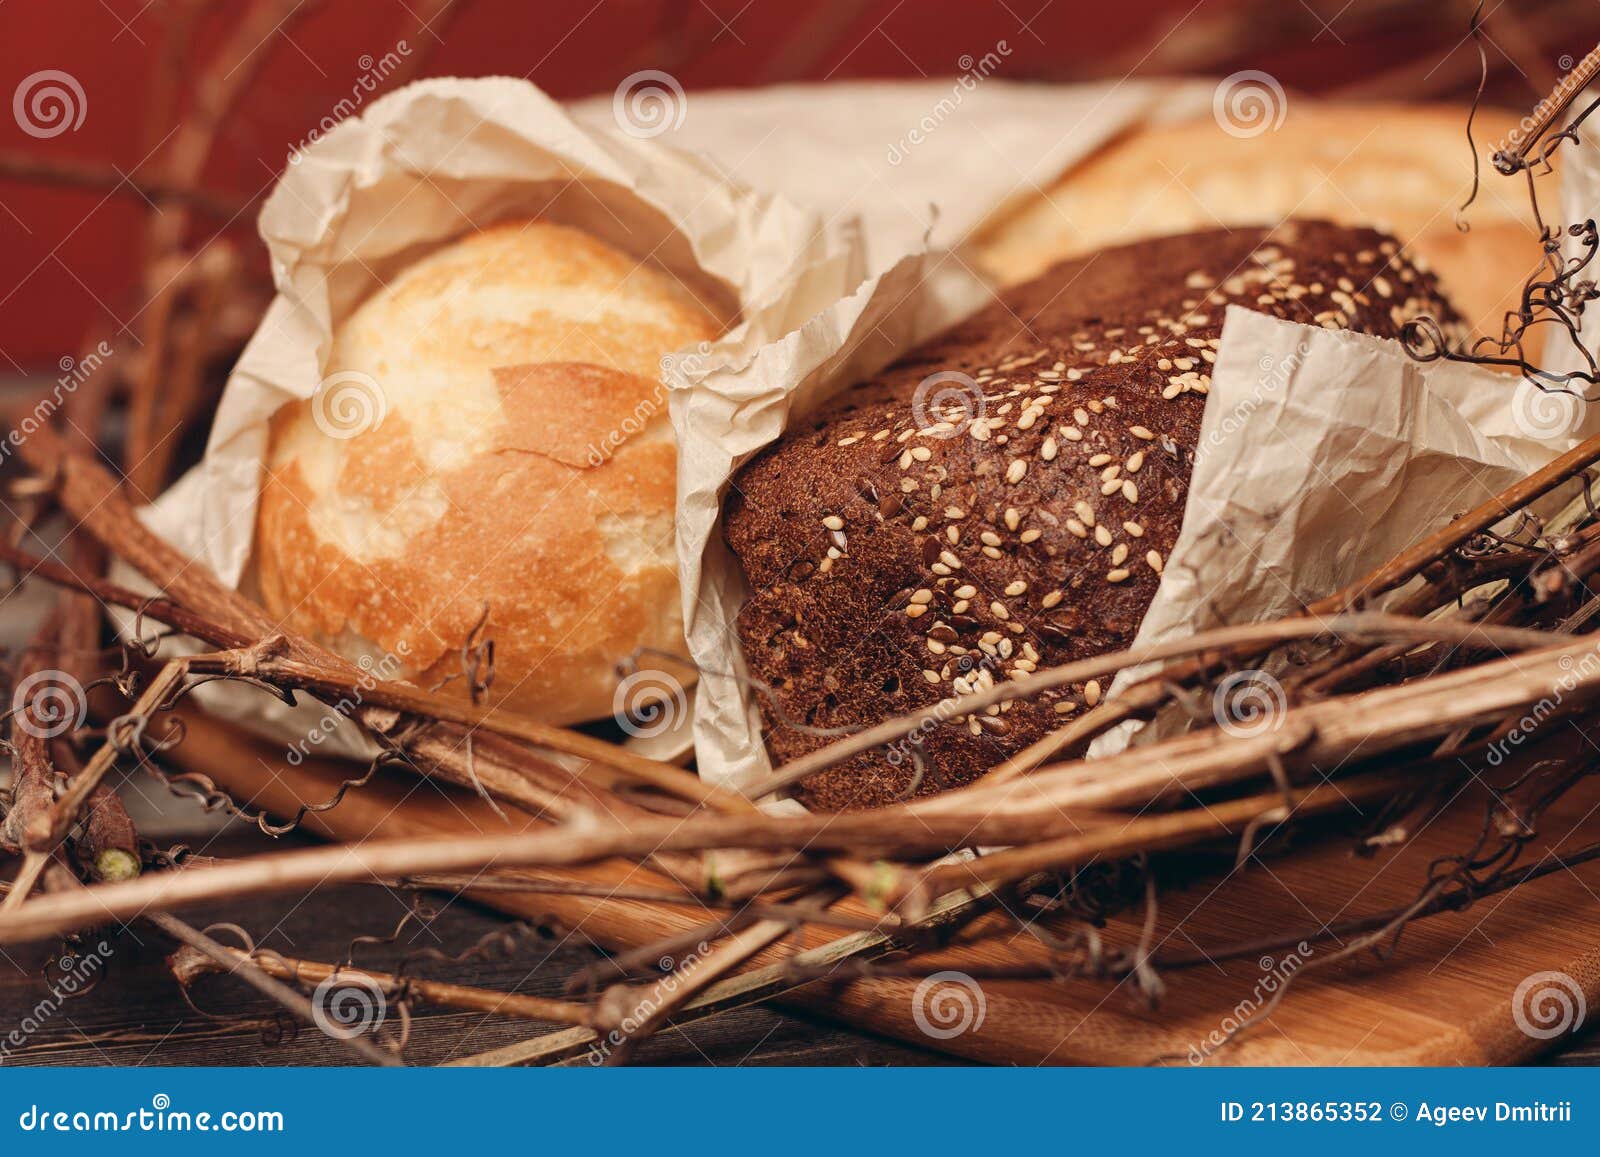 https://thumbs.dreamstime.com/z/flour-product-loaf-bread-baked-goods-branches-nest-close-up-flour-product-loaf-bread-baked-goods-213865352.jpg